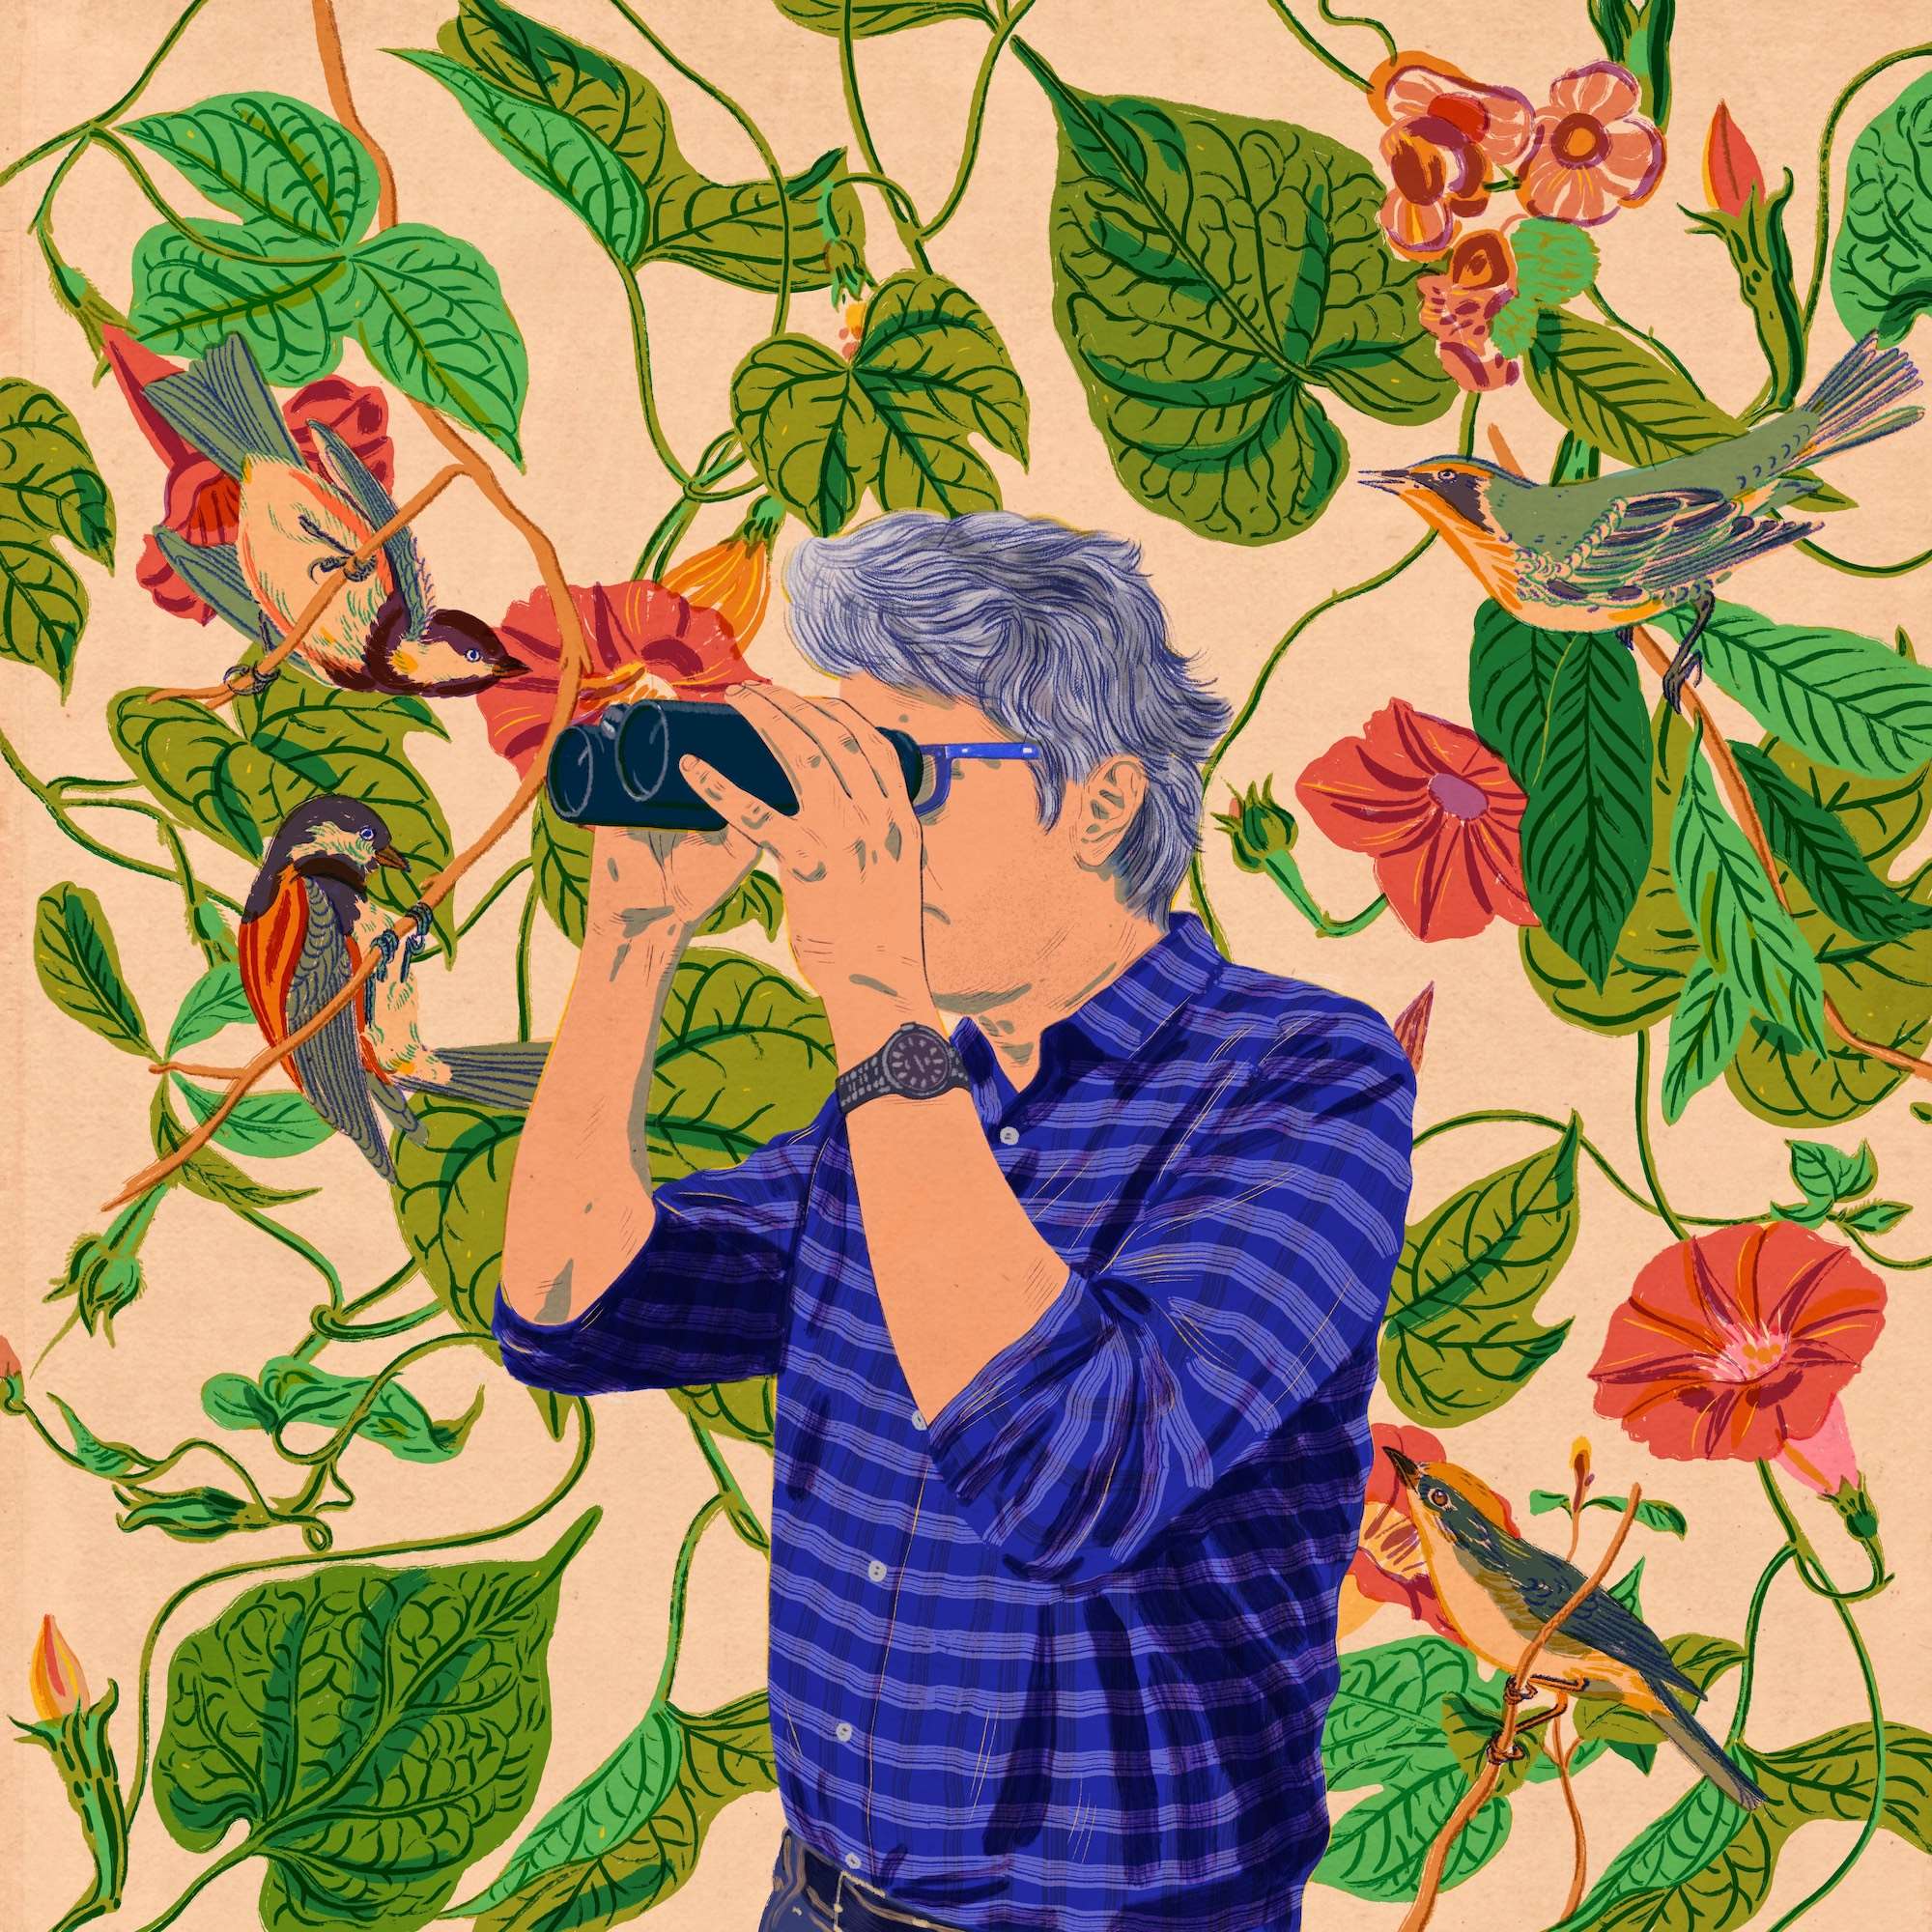 Anna Higgie, Detailed illustration of a man with binoculars with wildlife and botanicals surrounding him.